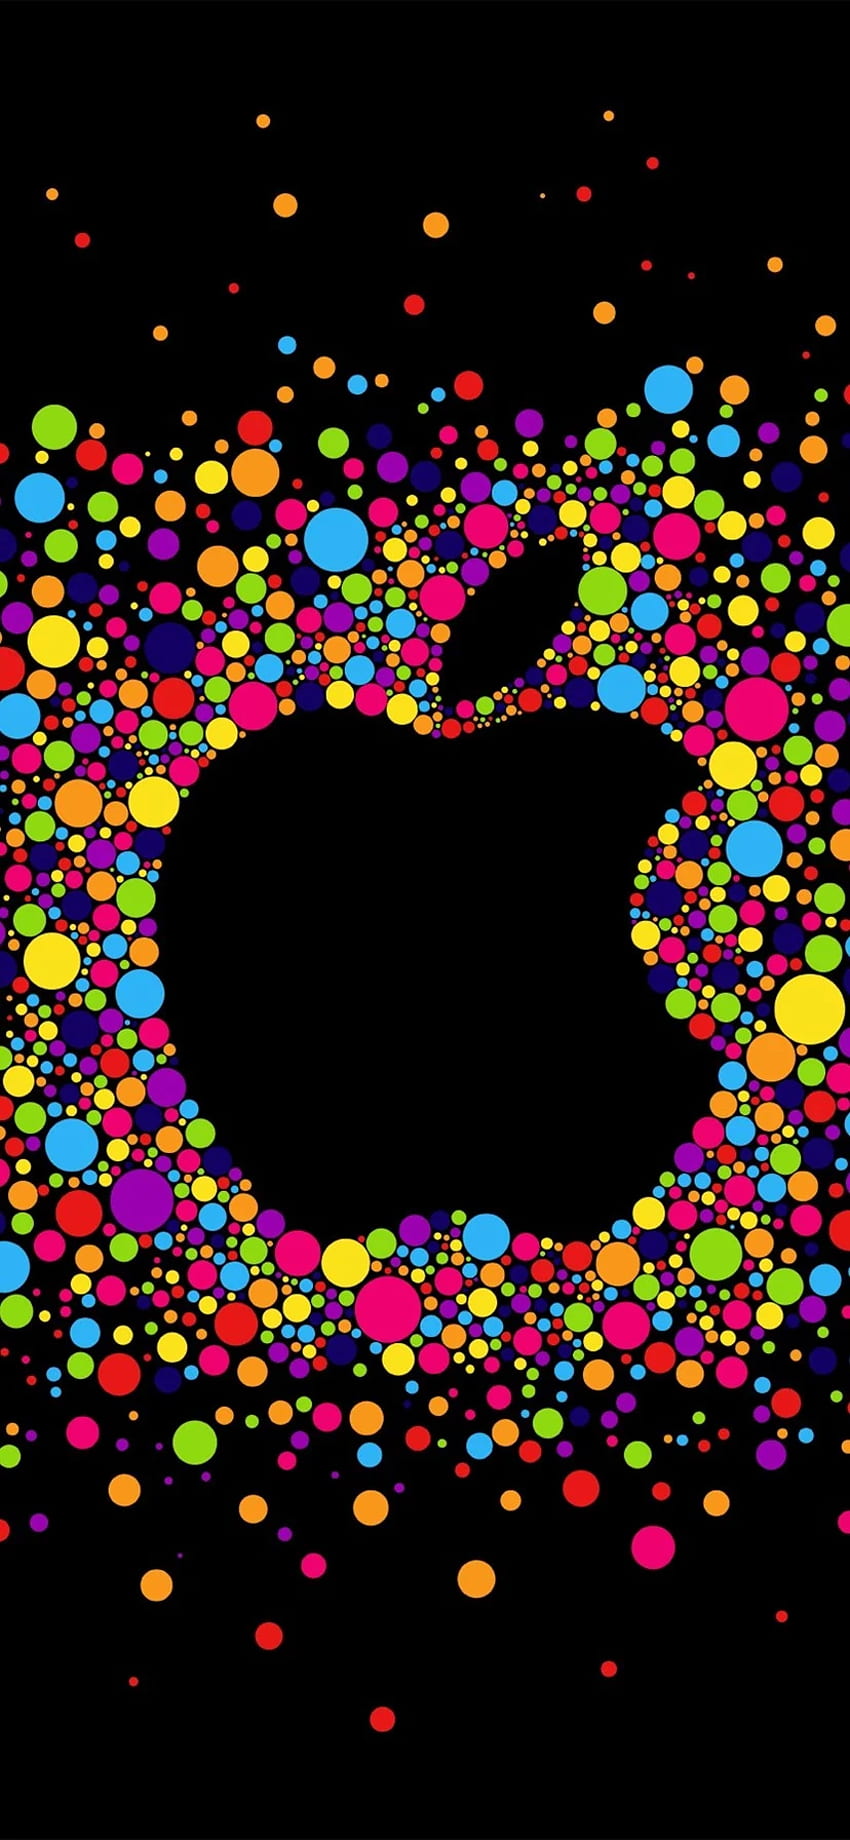 Colorful Circles, Apple Logo, Black Background IPhone 11 XR , Background HD phone wallpaper